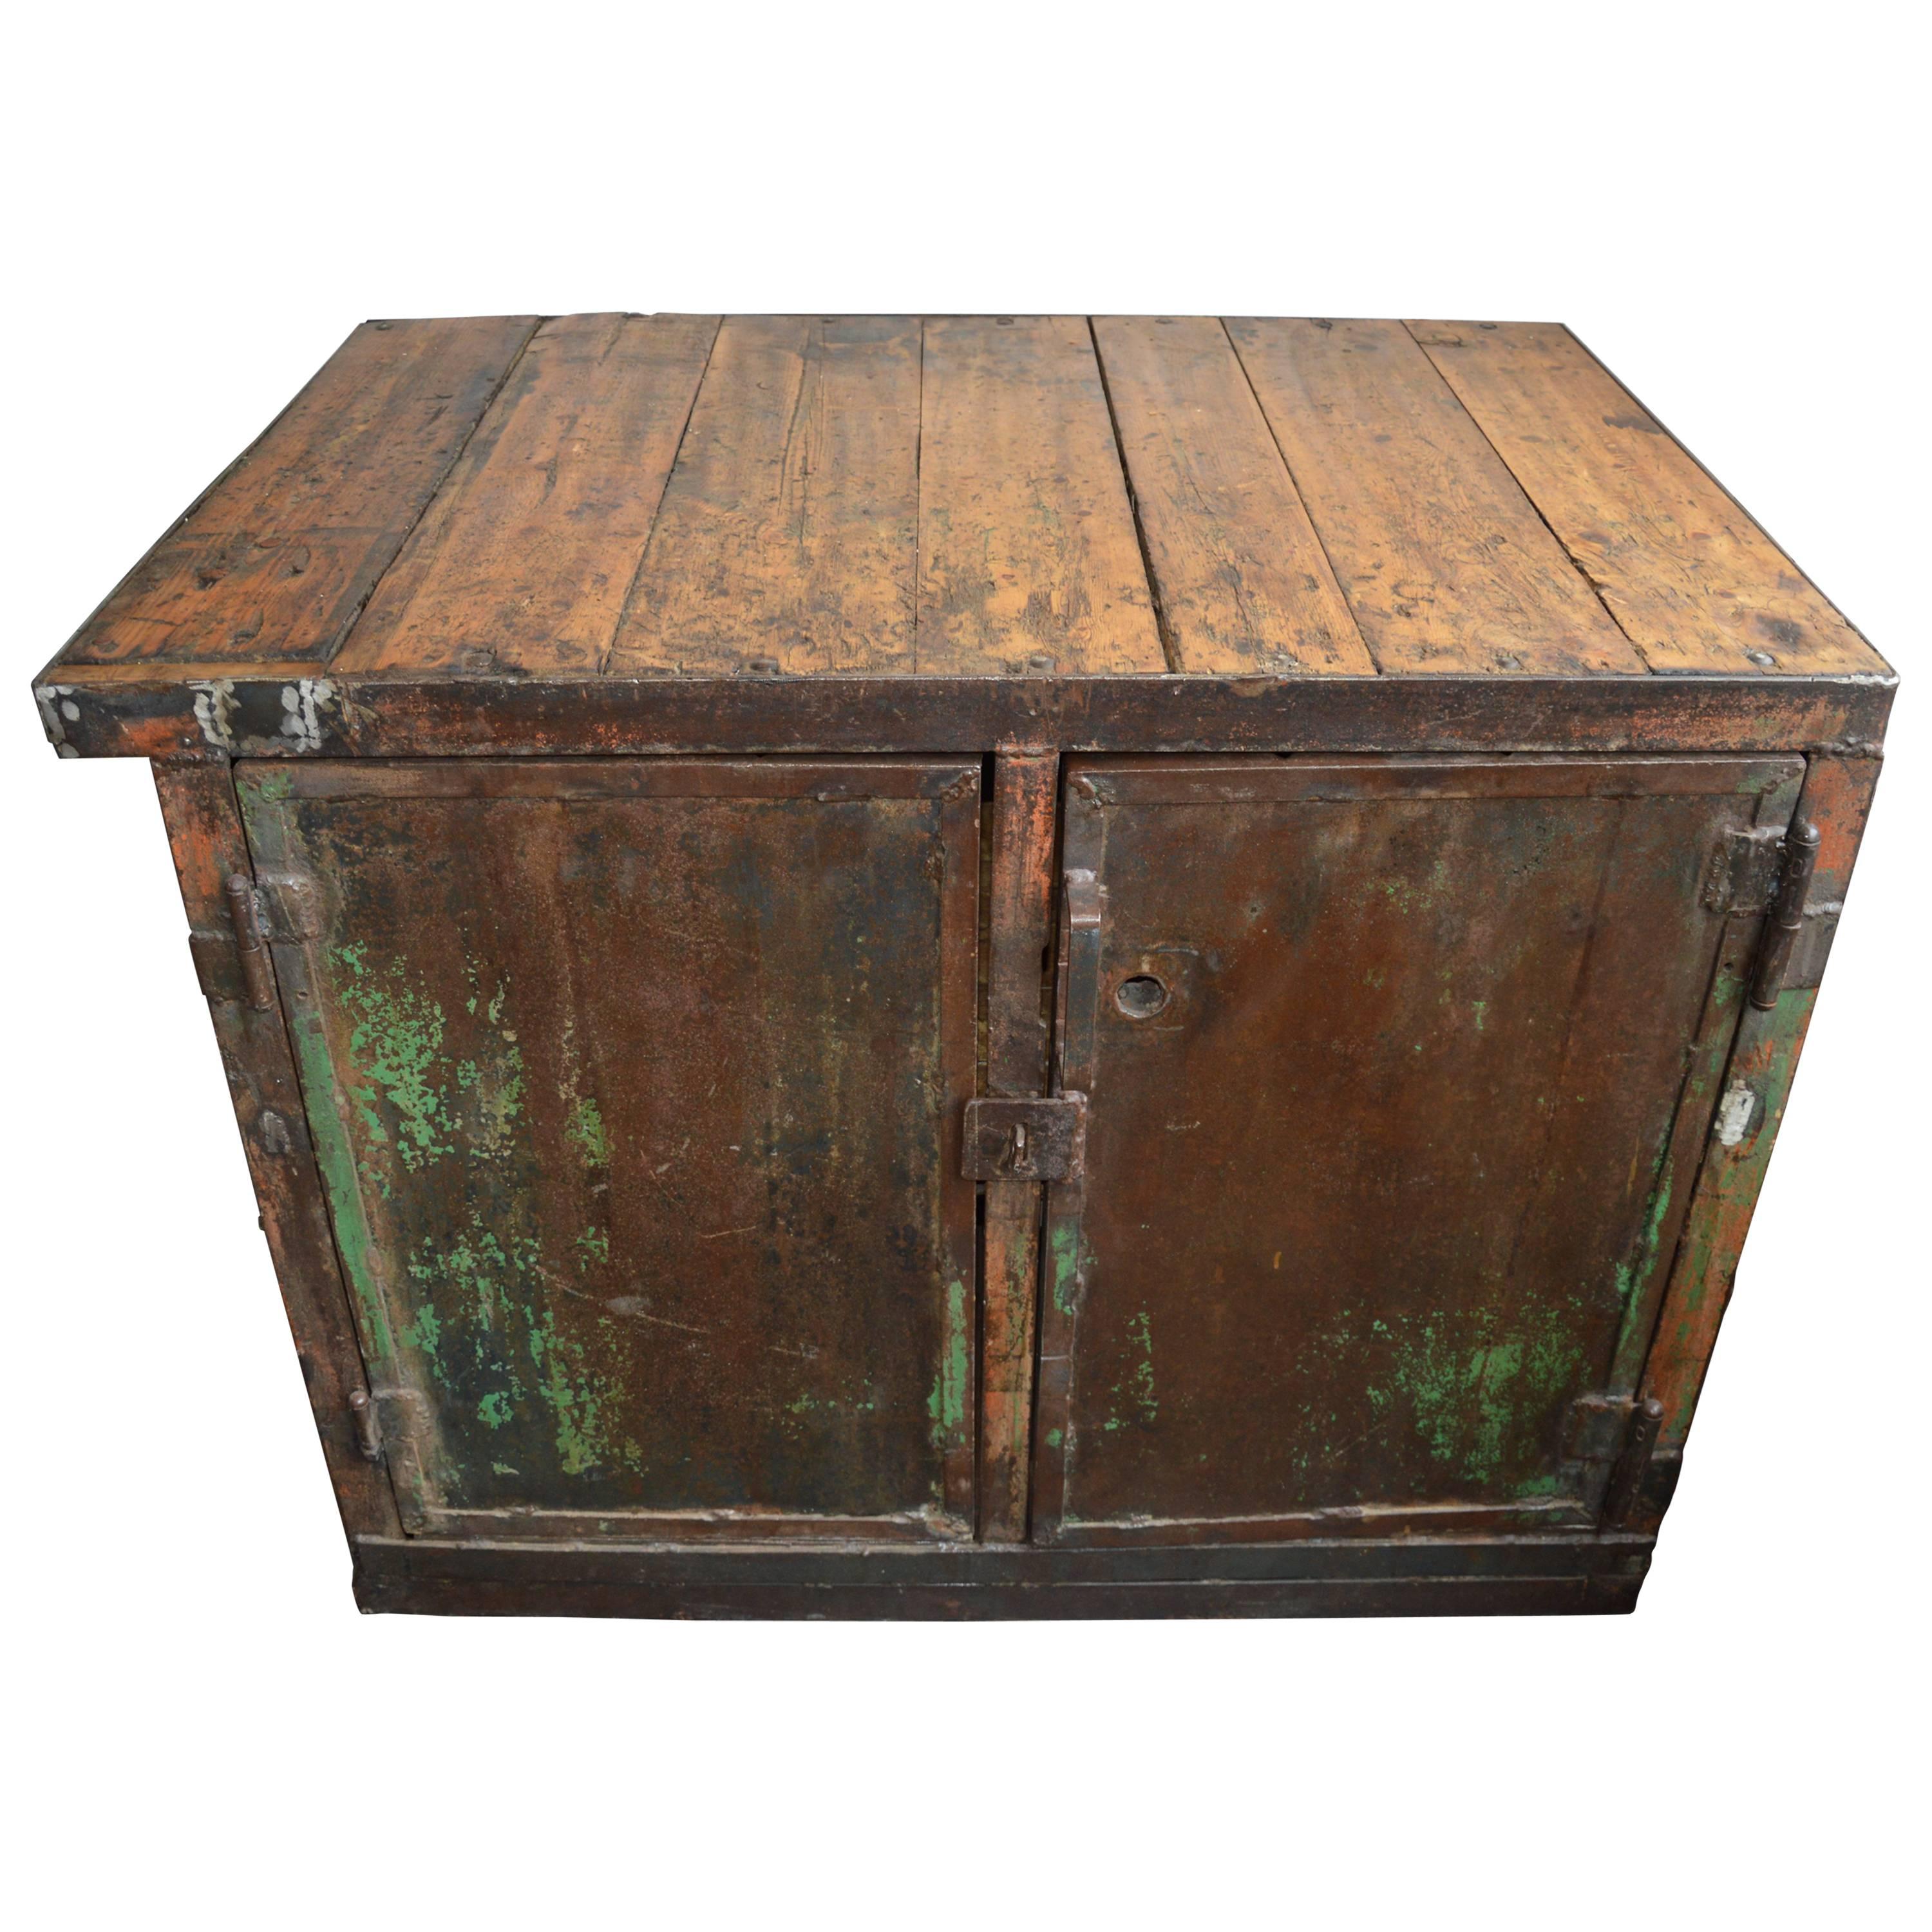 Unique 20th Century Industrial Workbench Wood Top Steel Frame For Sale